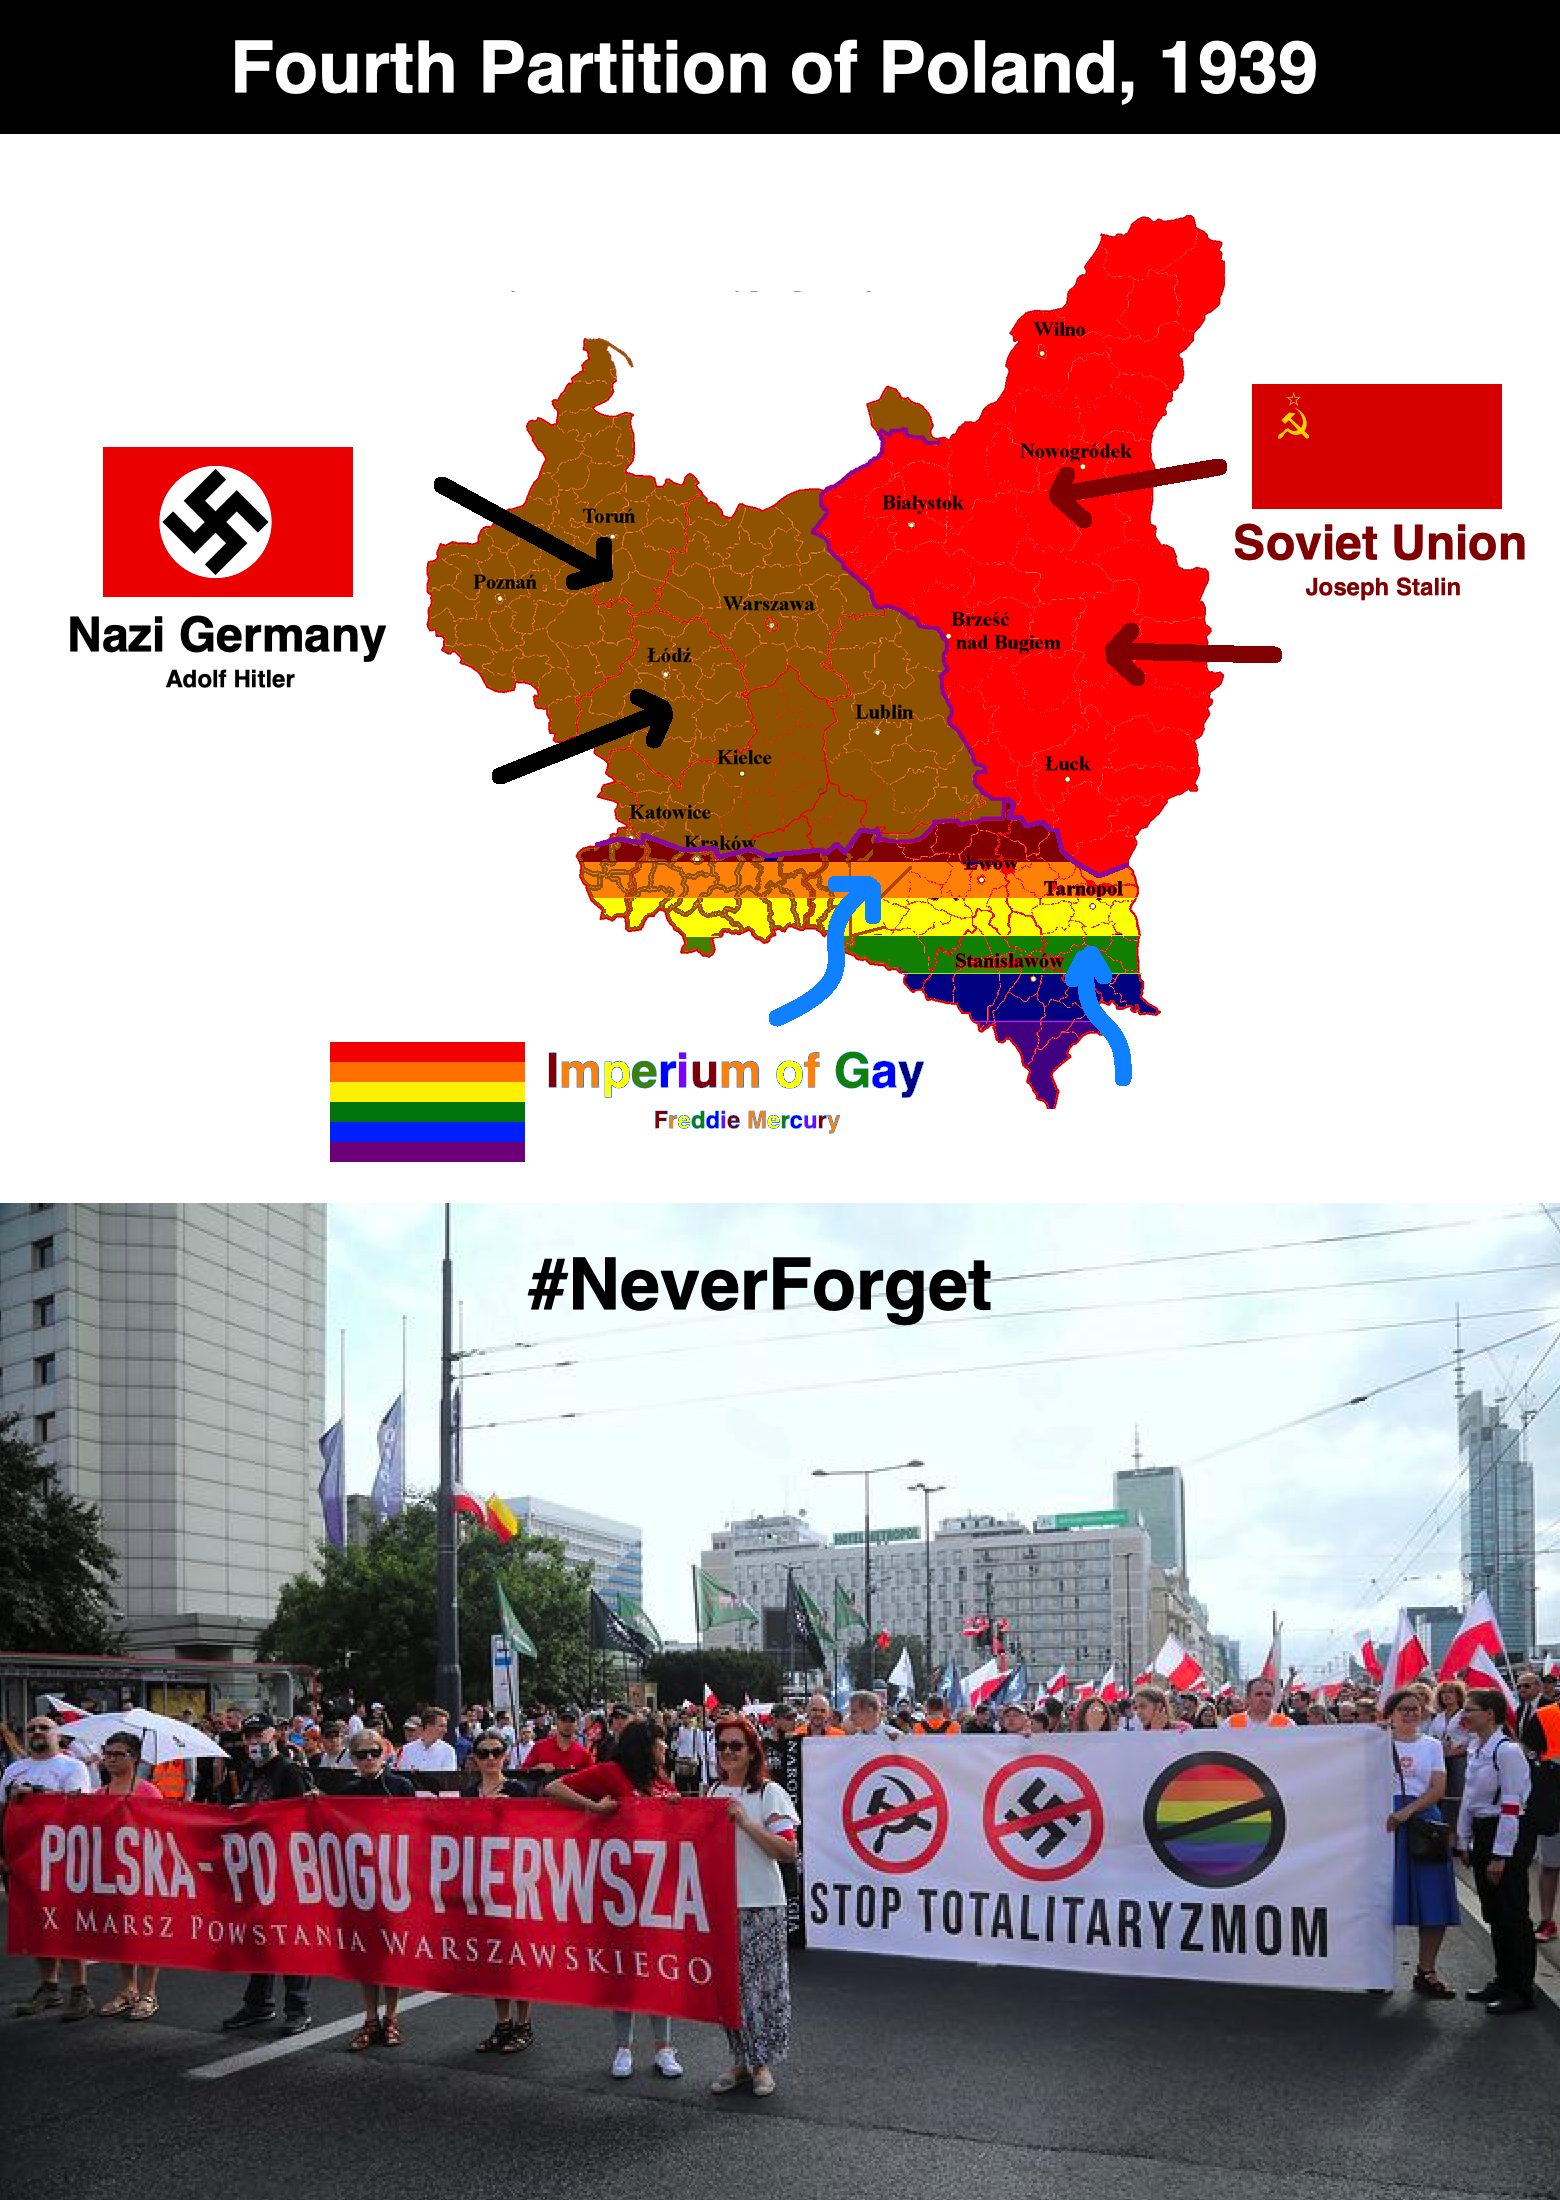 Poland is invaded and partitioned by the joint forces of Nazi Germany, the Soviet Union, and the Imperium of Gay, 1939. 80 years later, Poles still remember the atrocities #NeverForget